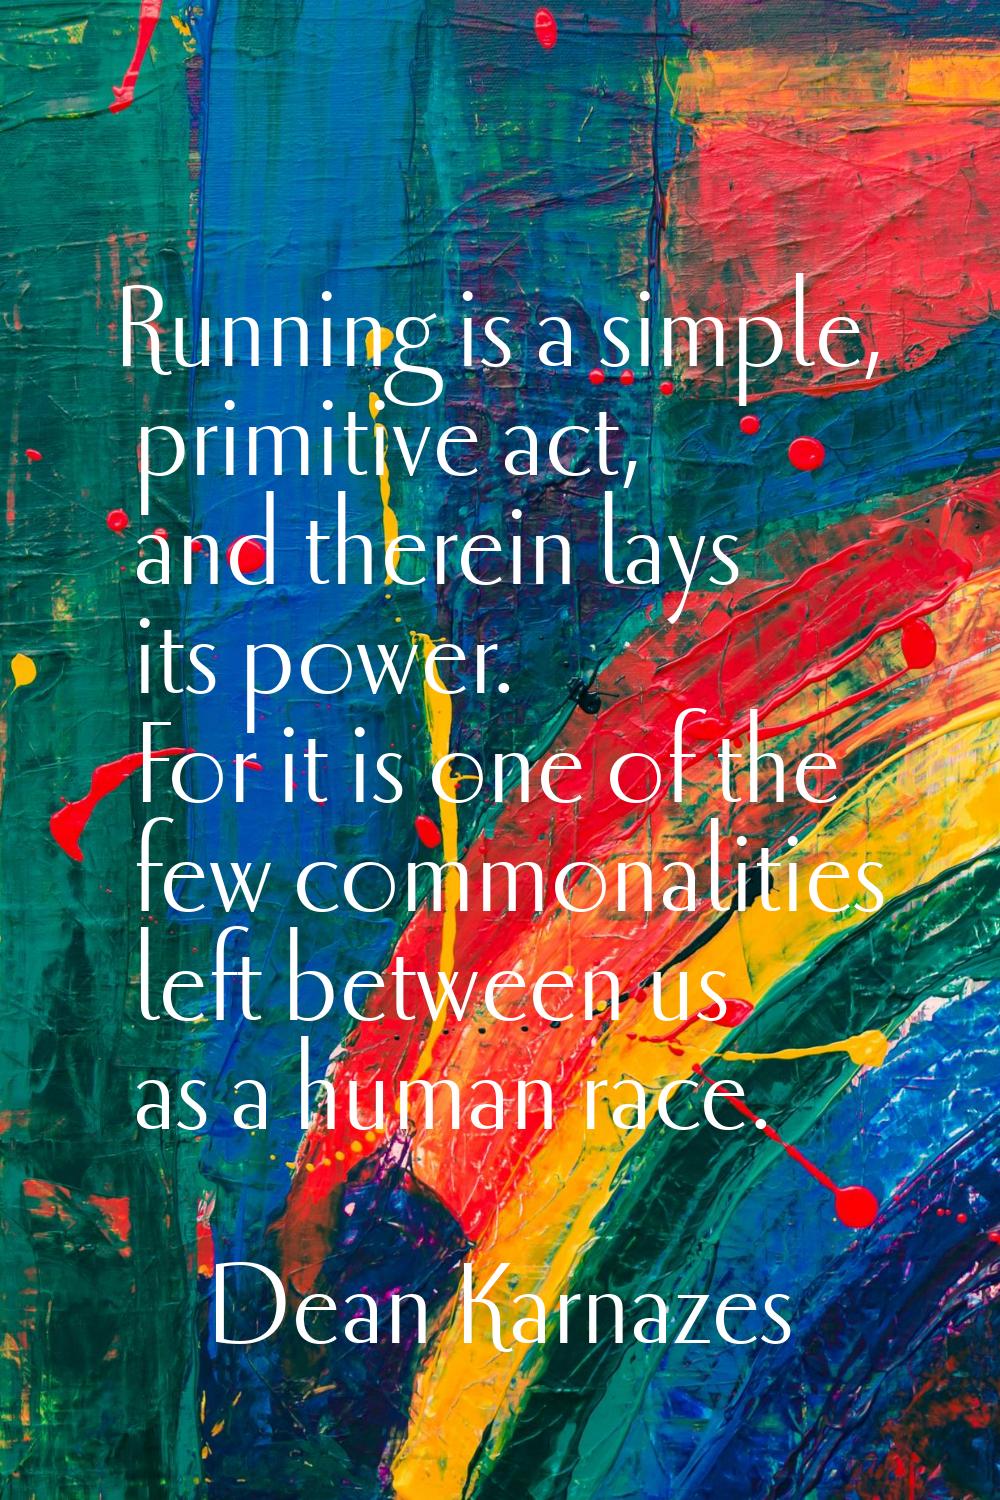 Running is a simple, primitive act, and therein lays its power. For it is one of the few commonalit